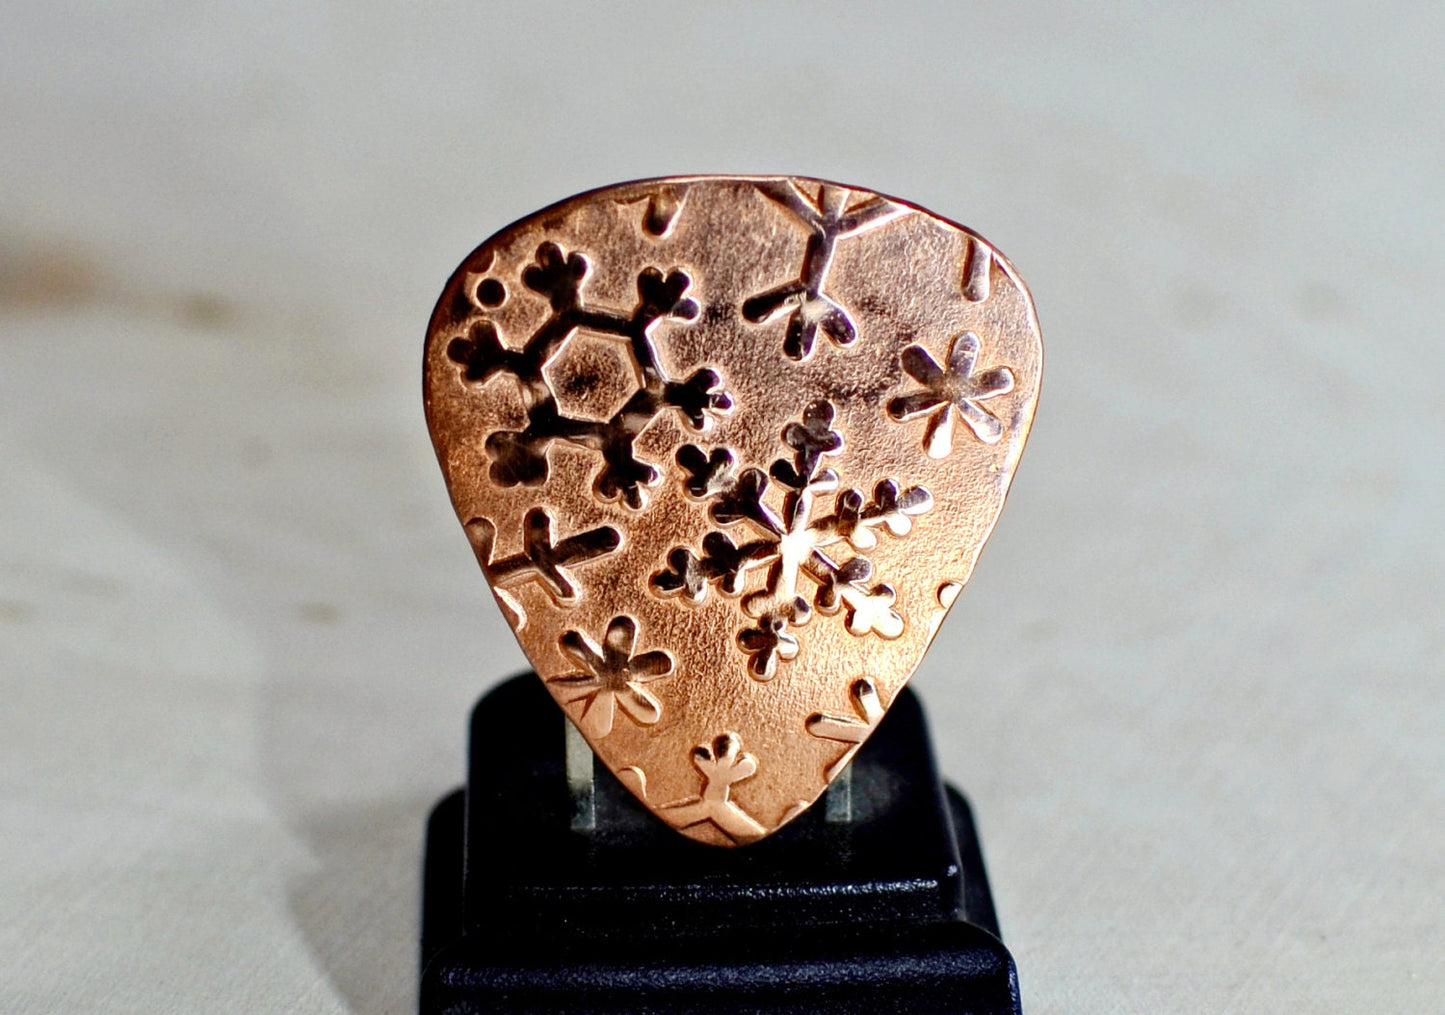 Snowflakes on copper guitar pick and a stand as shown in photo number 7